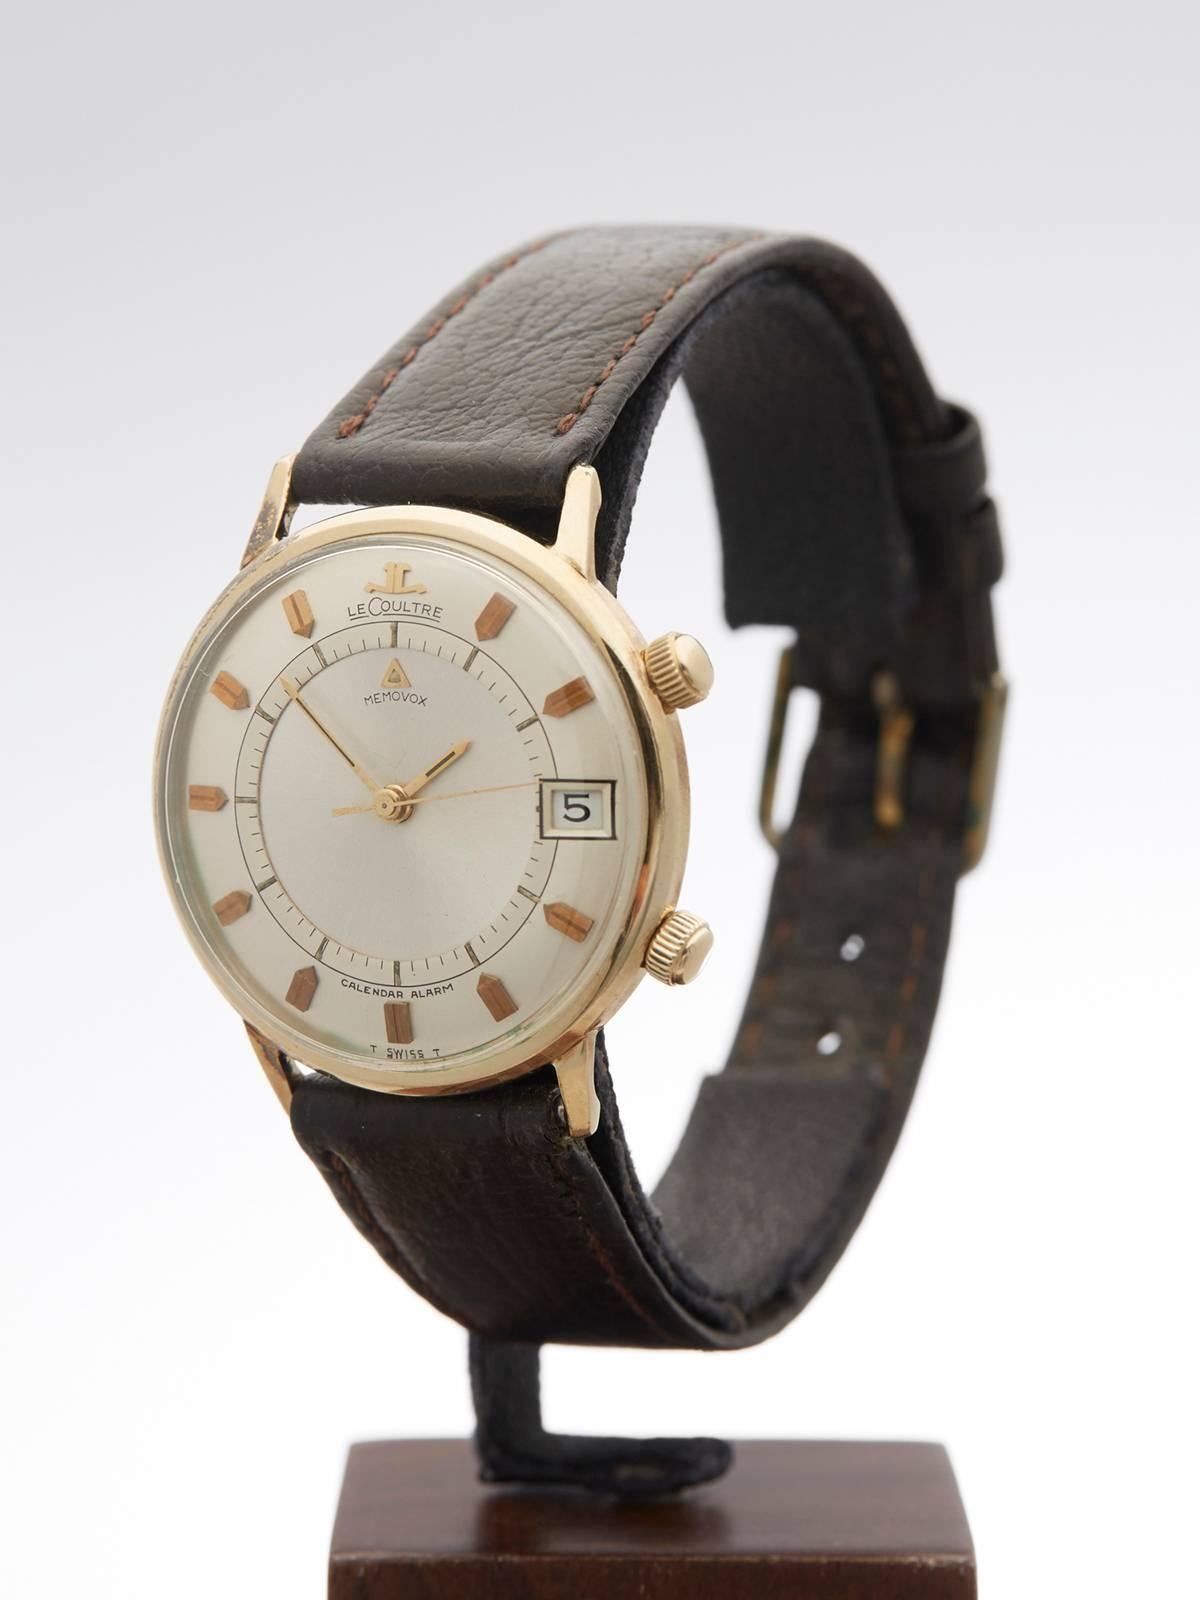 Ref: COM745
Model: 2979-911
Serial: 668****
Condition: 8 - Good condition
Age:	1950's
Case Diameter: 36 mm
Case Size: 36mm
Box and Papers: Xupes Presentation Pouch
Movement: Mechanical Wind
Case: Vermeil Gold
Dial: Champagne
Bracelet: Brown